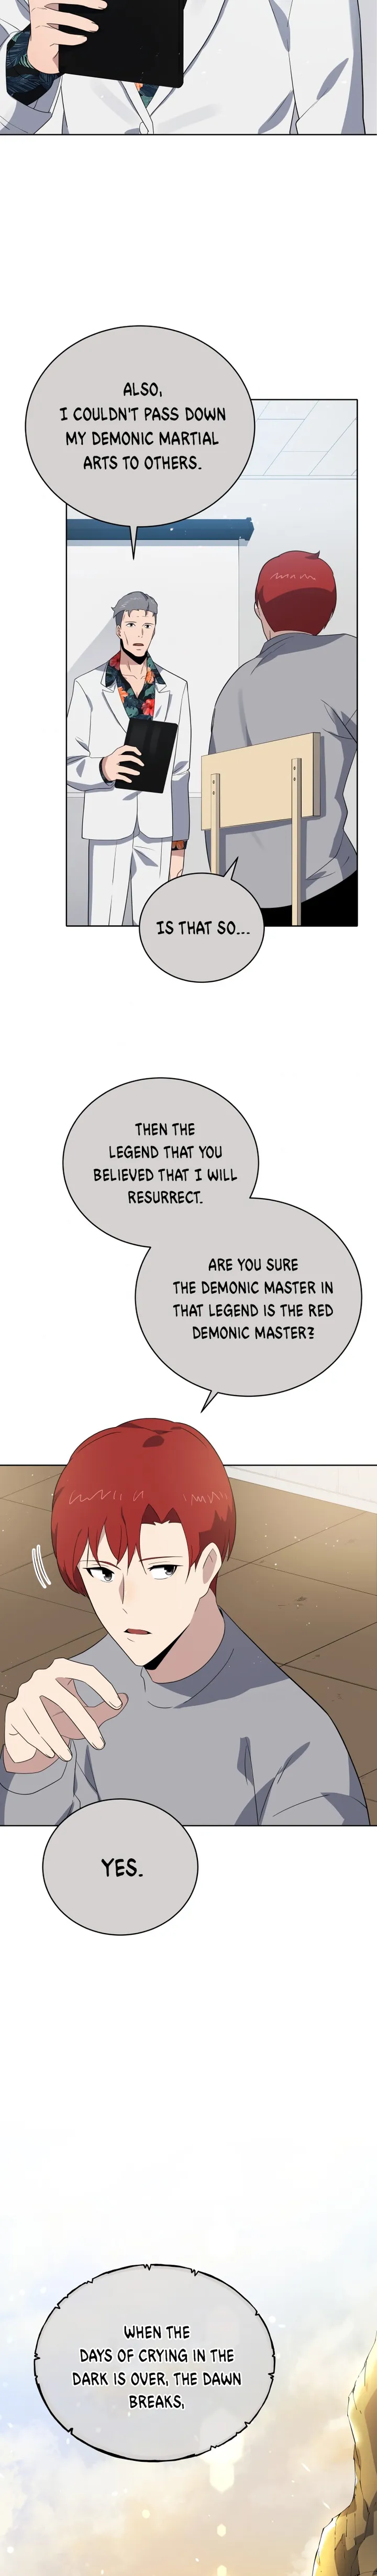 The Descent Of The Demonic Master - Page 2